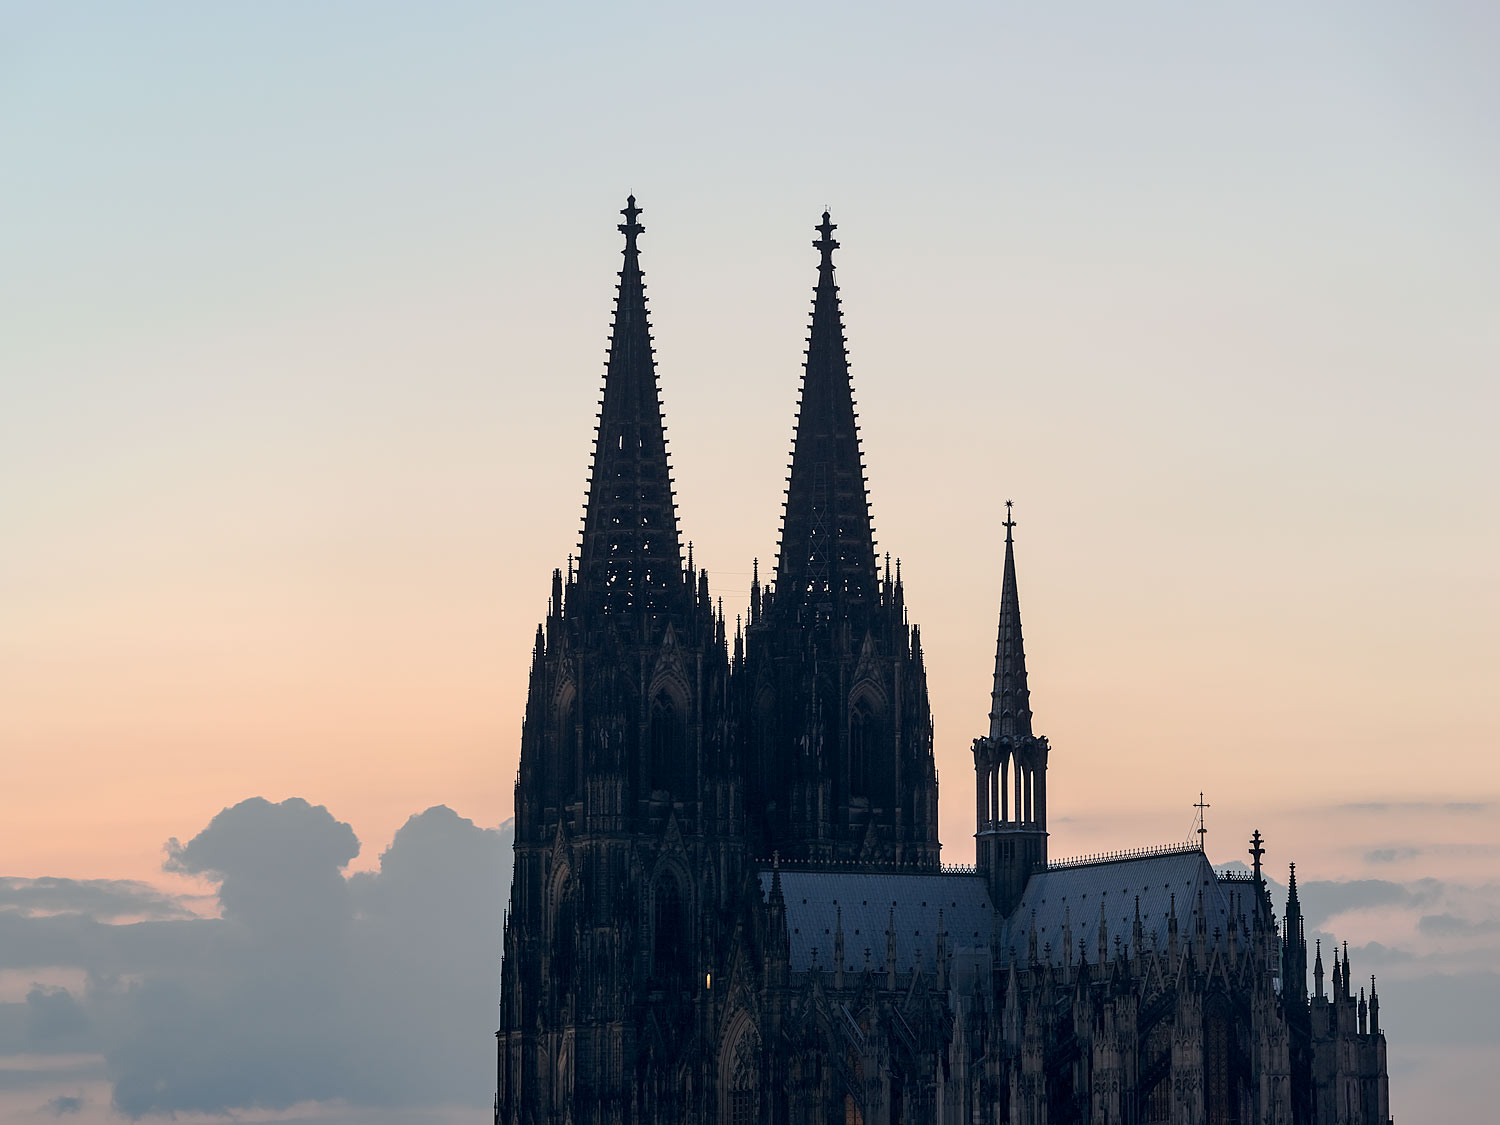 Gothic Cathedral in Cologne (Köln), Germany at SunsetThe Gothic Cathedral in Cologne is a UNESCO World Heritage Site and one of Germany's most visited tourist attractions.